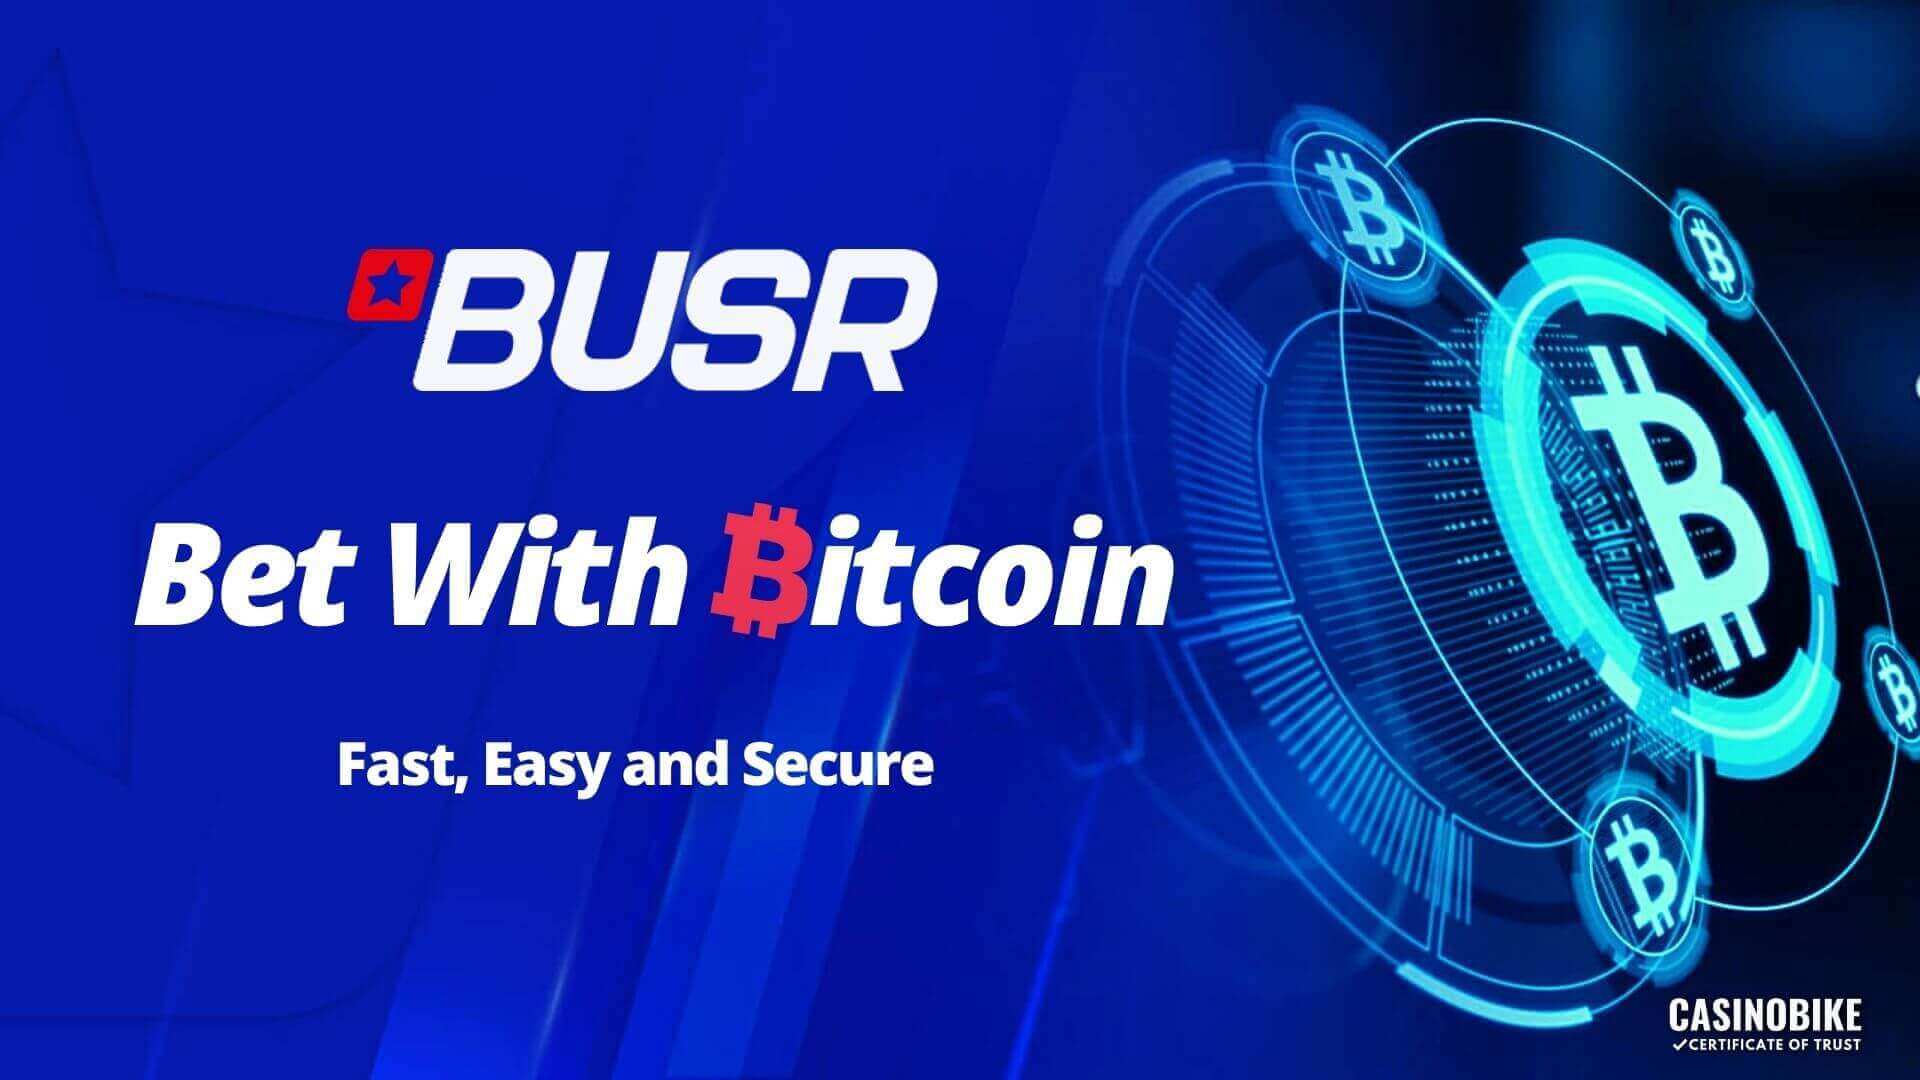 Bet with Bitcoin at BUSR is fast, easy and secure